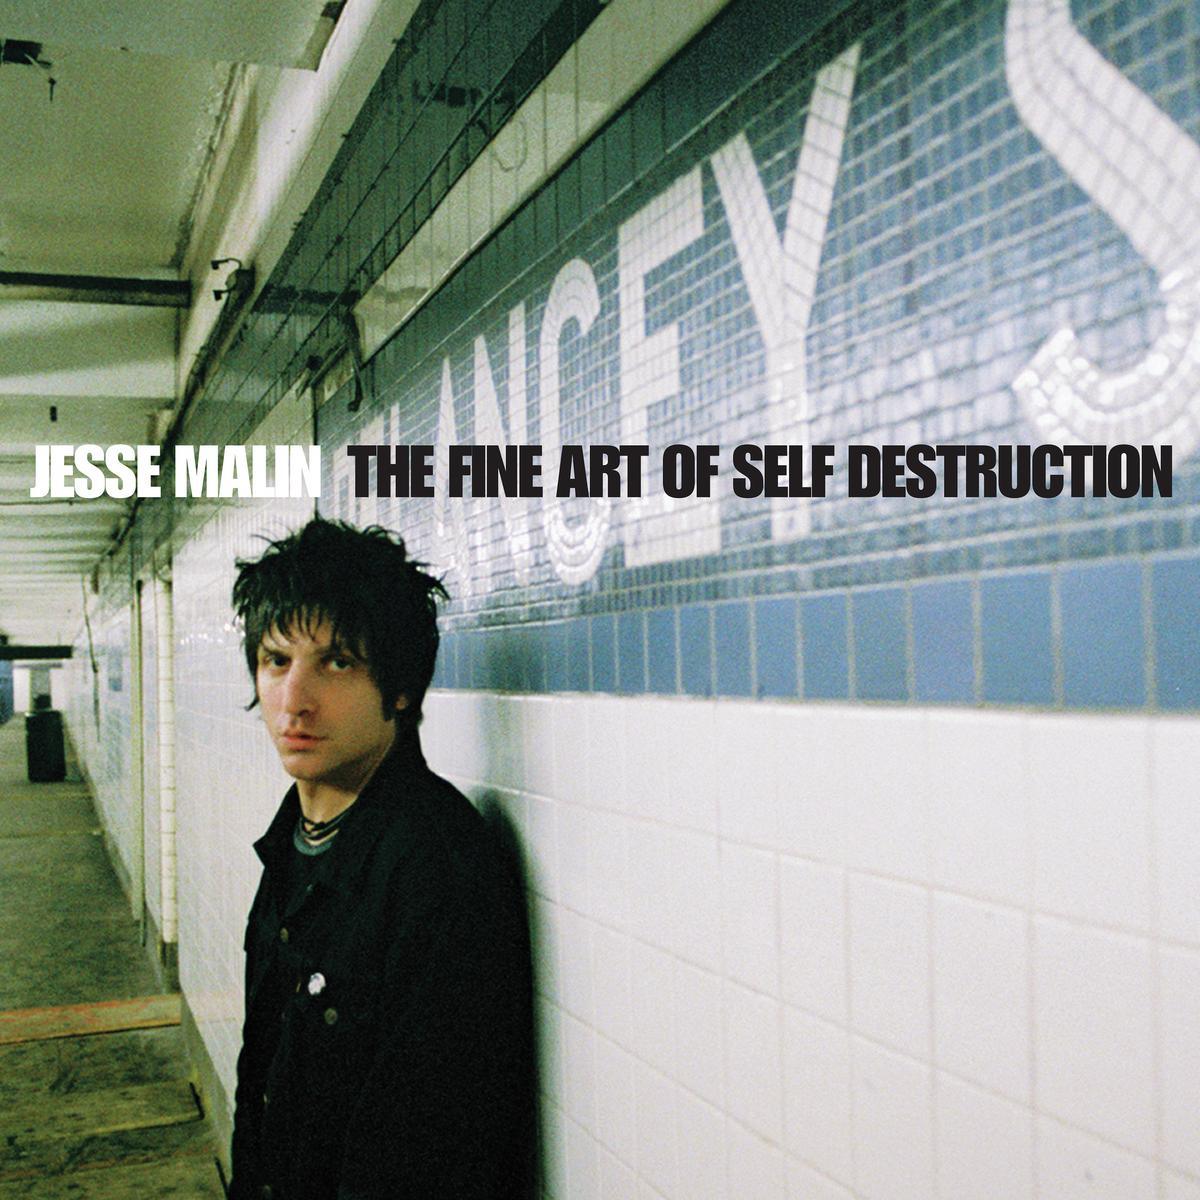 JESSE MALIN 20TH ANNIVERSARY EXPANDED REISSUE OF THE FINE ART OF SELF DESTRUCTION OUT FEBRUARY 17, 2023 - MNRK Heavy